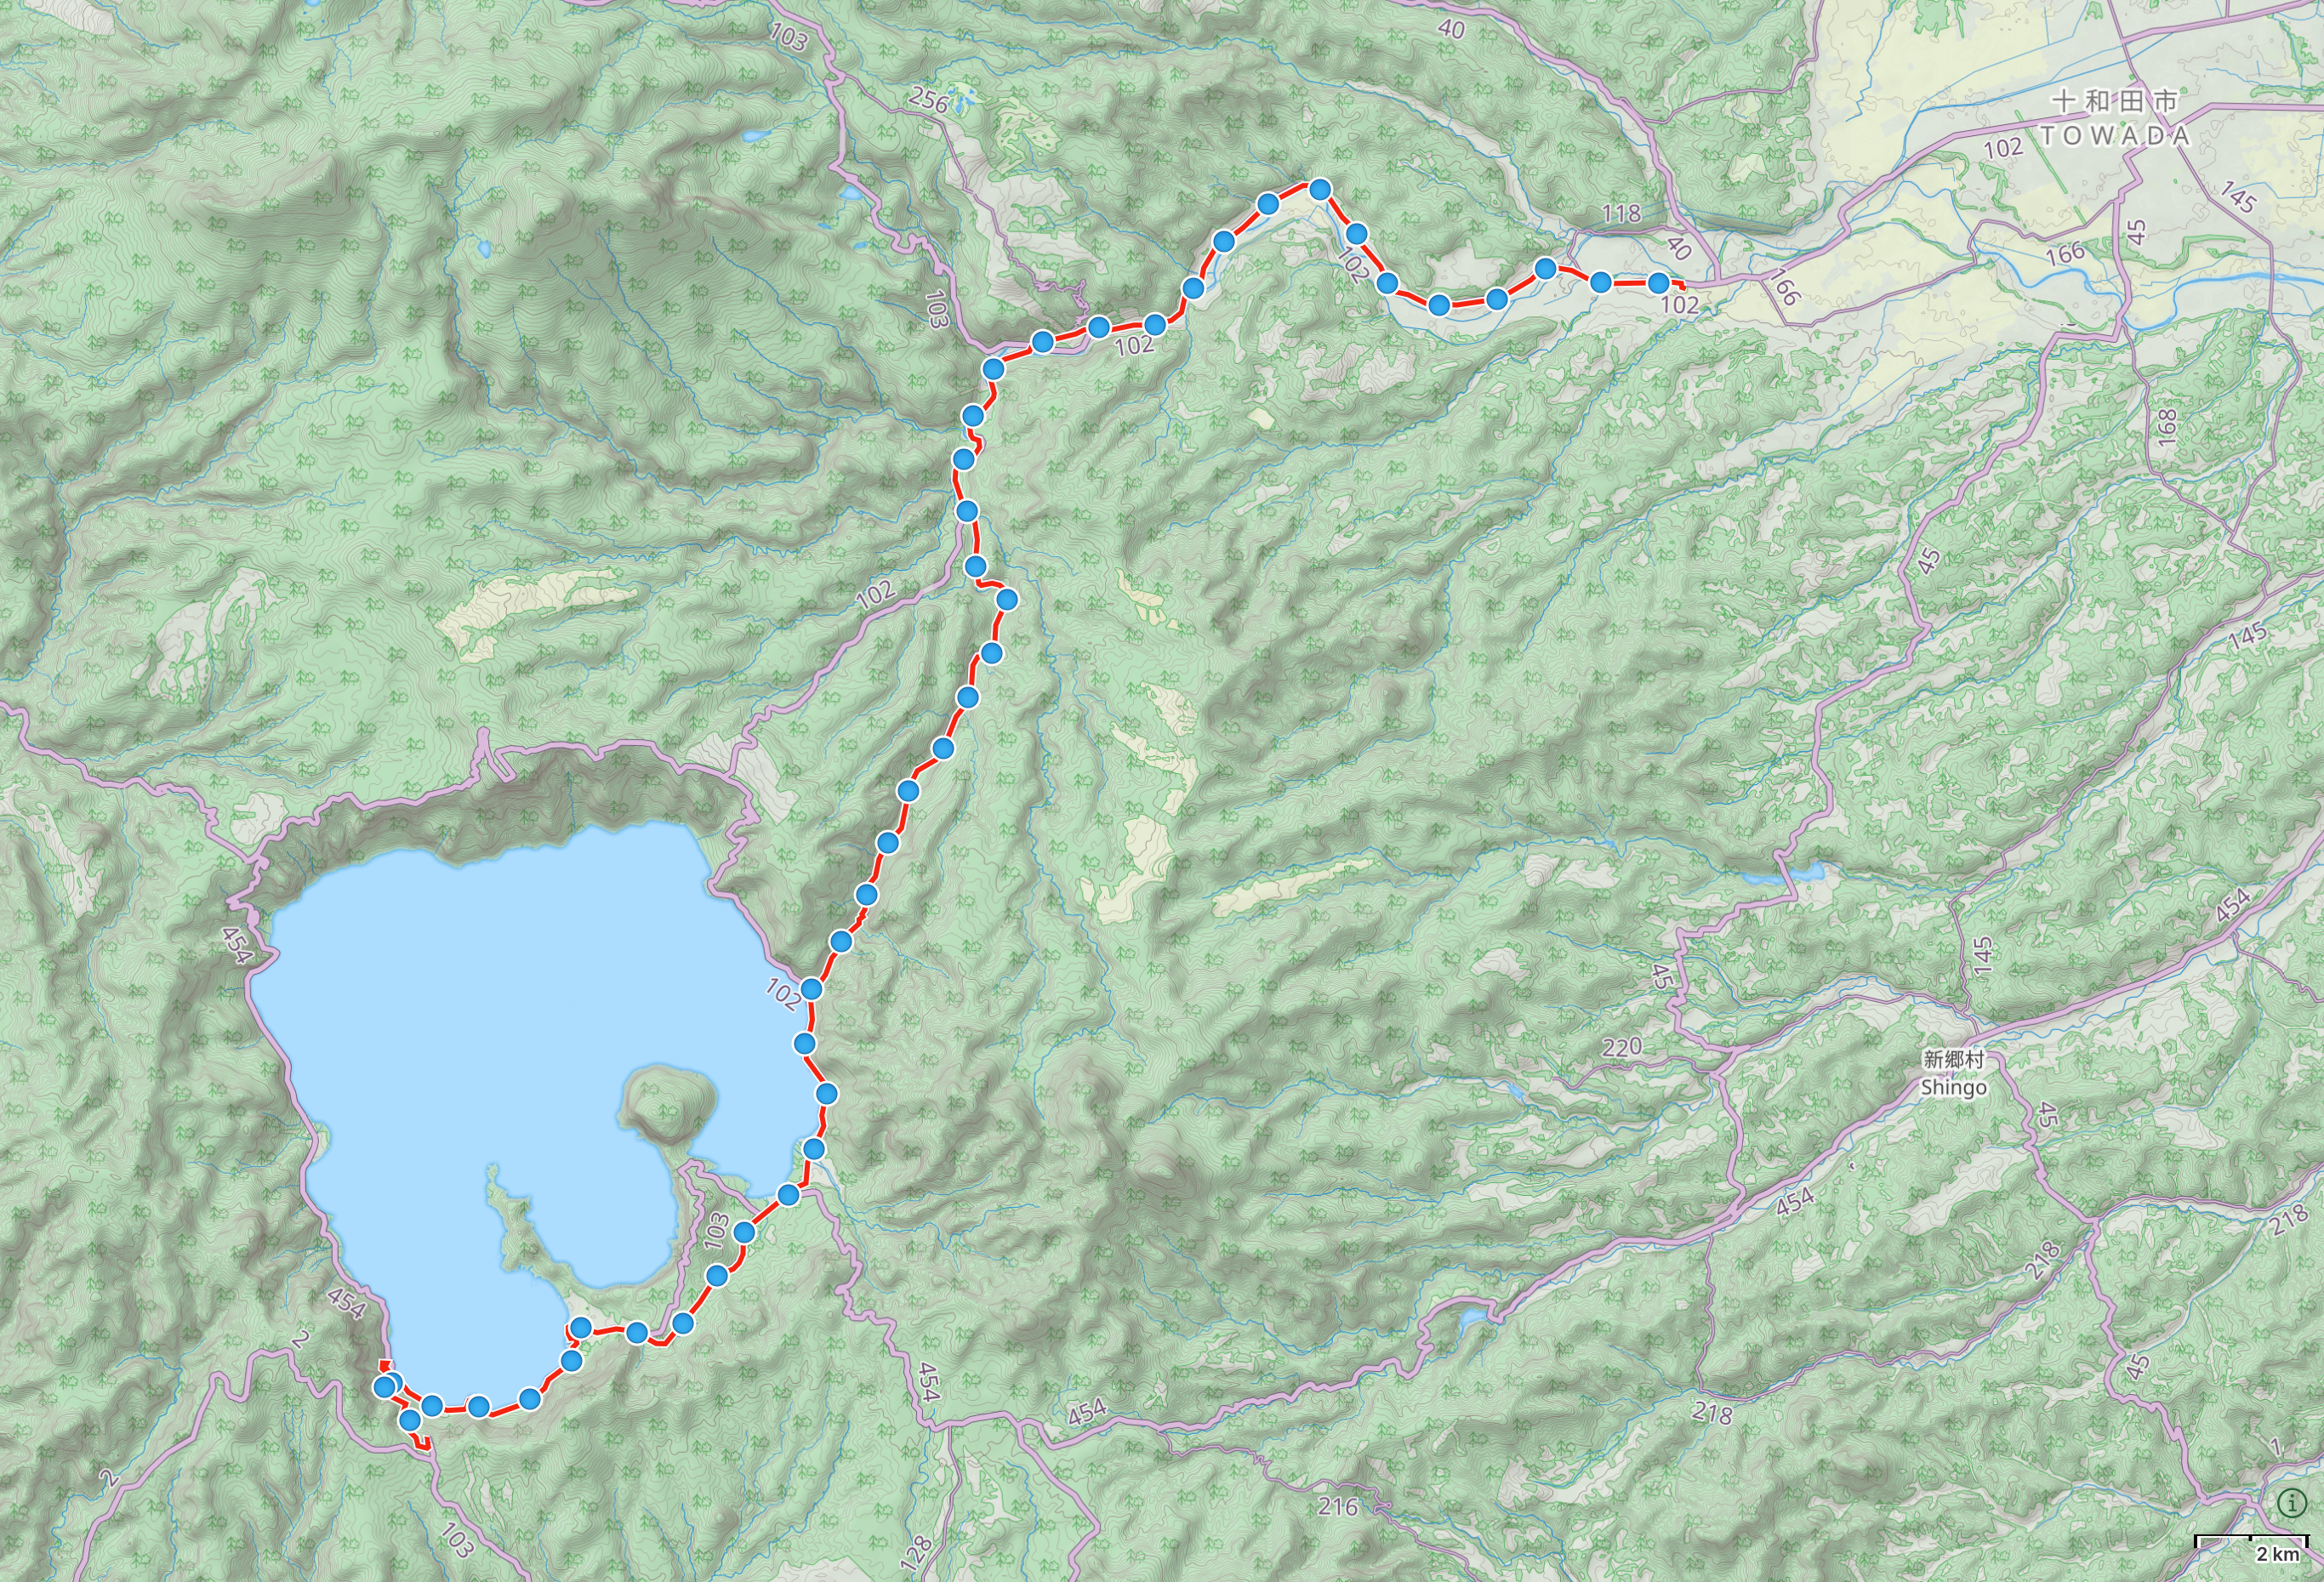 Map of Tōhoku with author’s route from Lake Towada to Towada, Aomori highlighted.